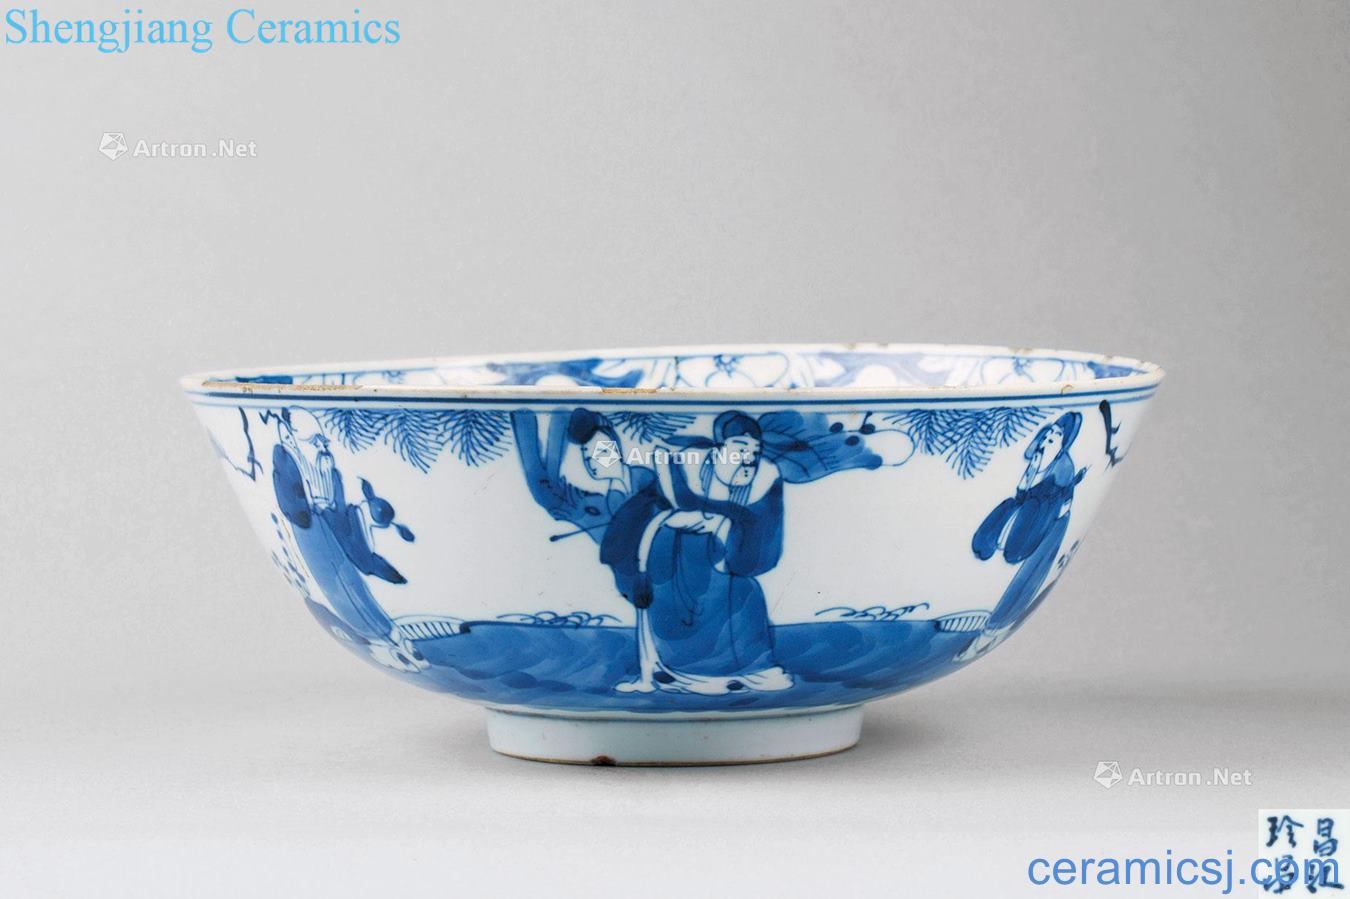 In the qing dynasty Blue and white landscape character green-splashed bowls